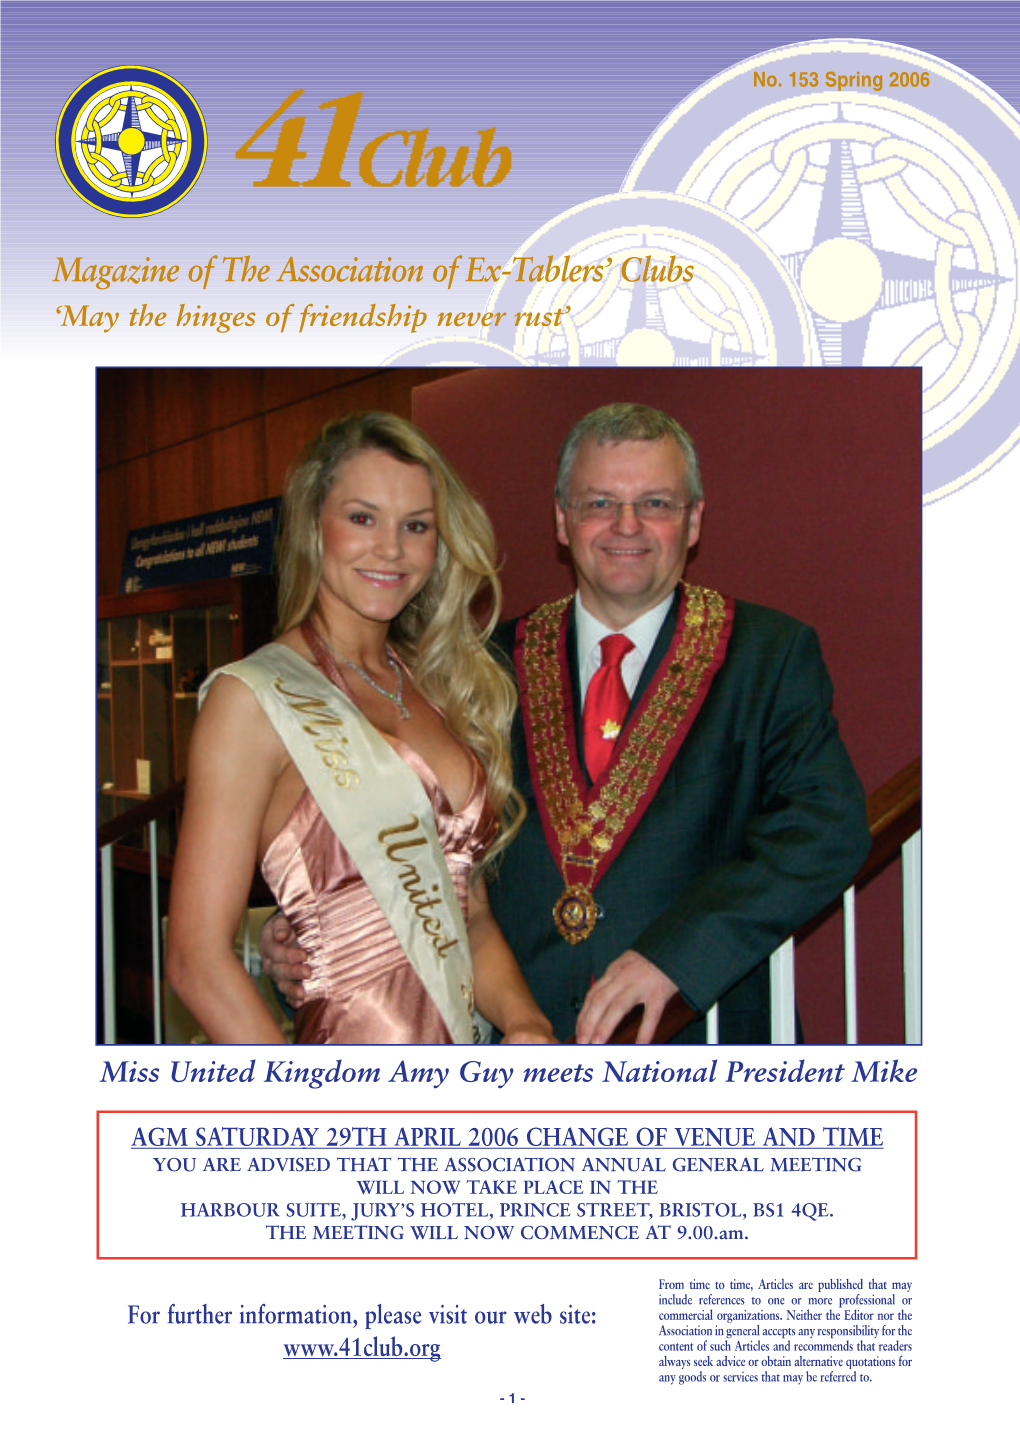 Magazine of the Association of Ex-Tablers' Clubs